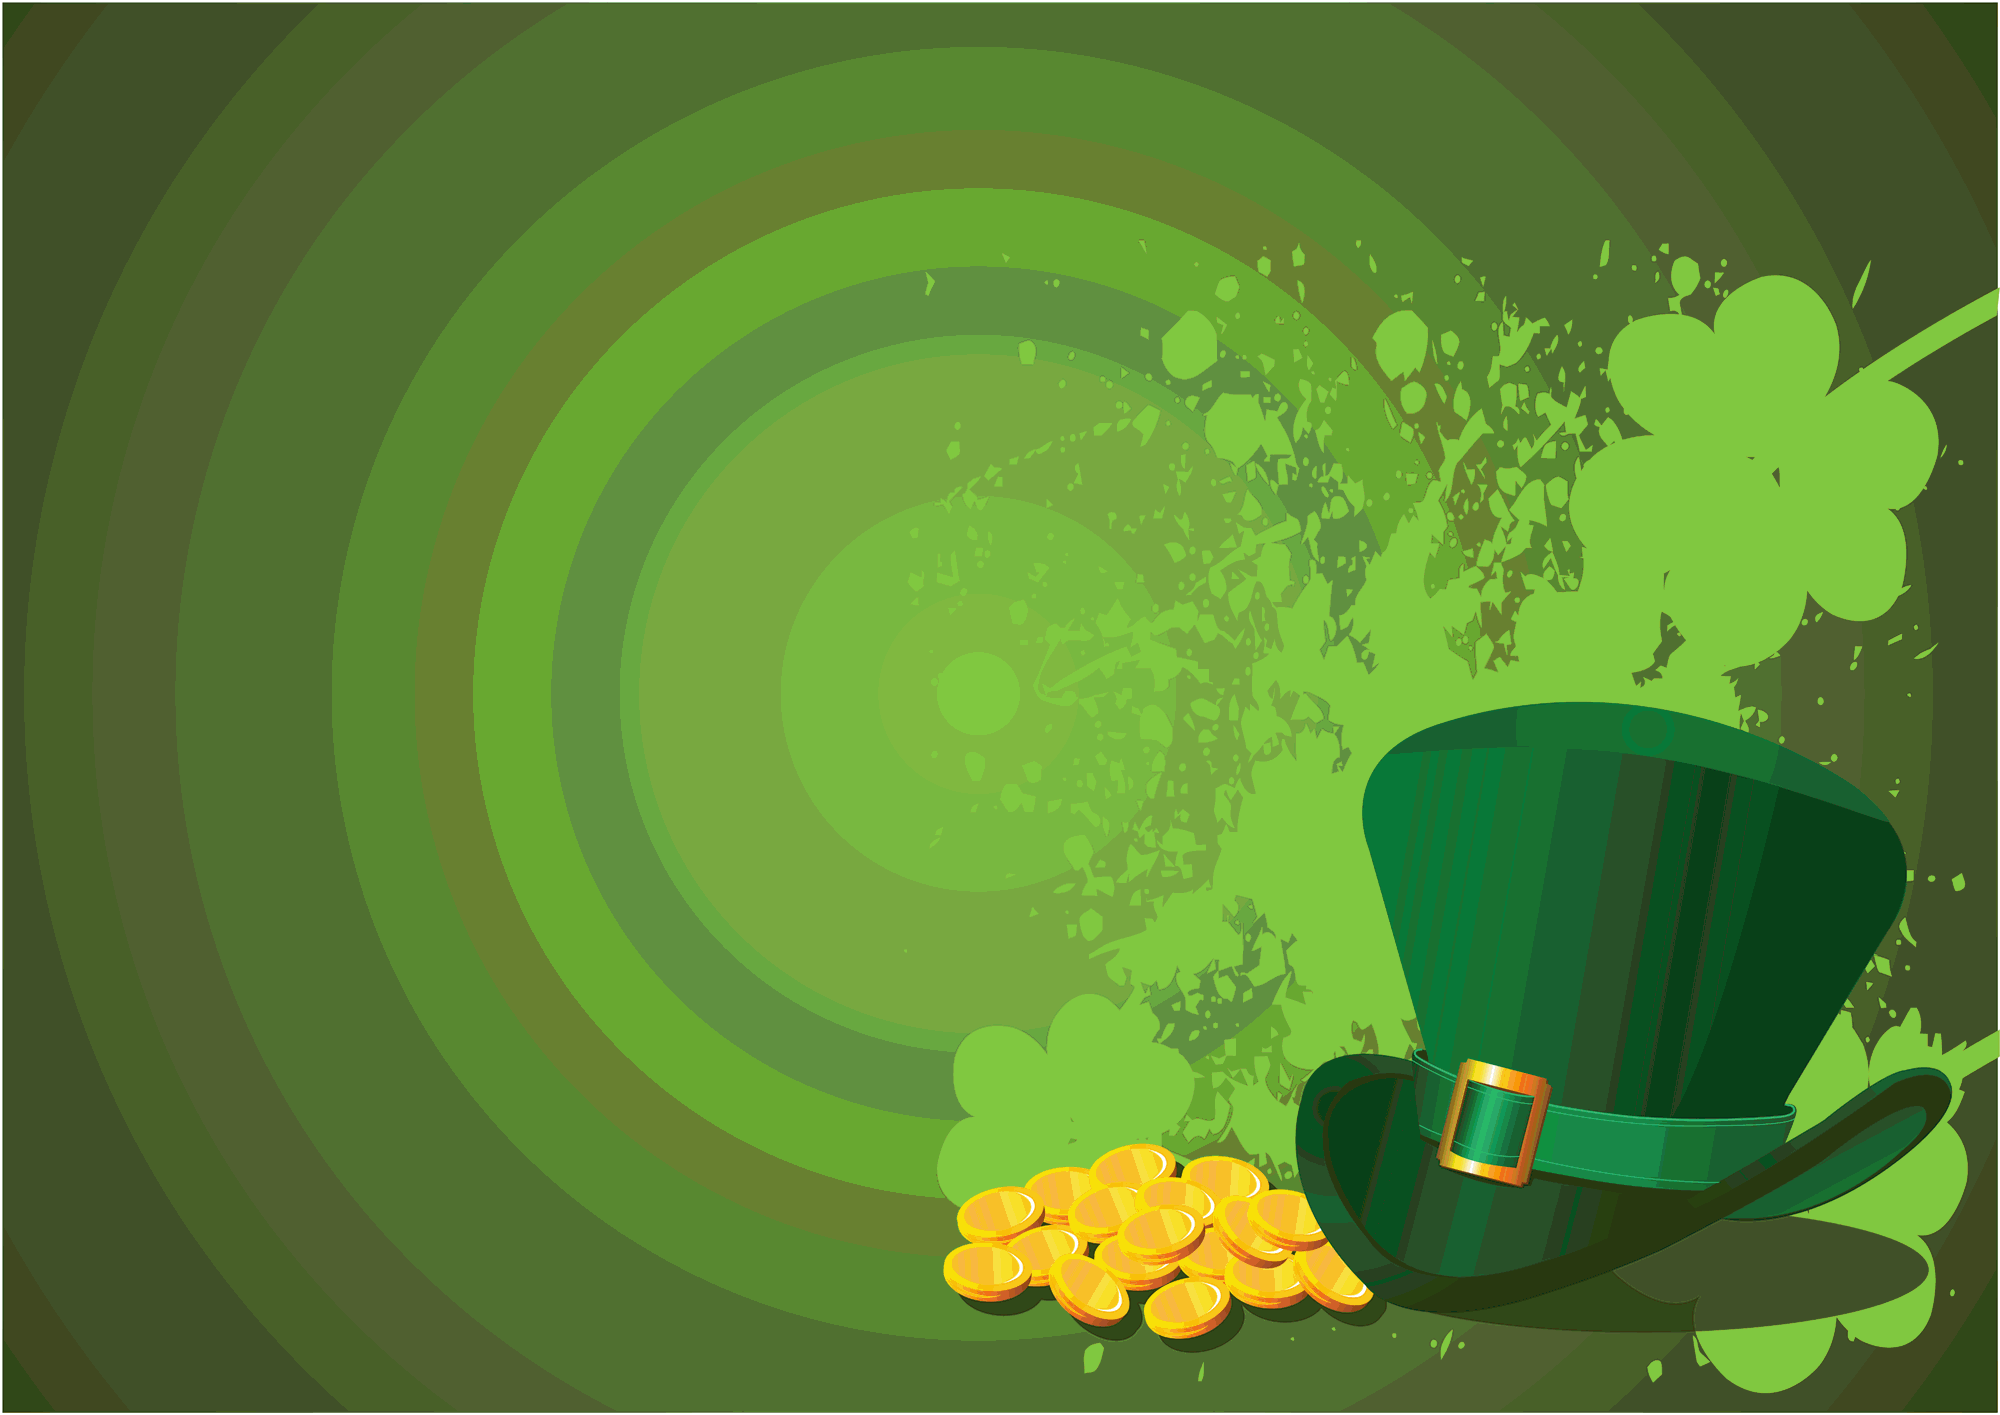 Free Wallpapers St Patricks Day - Wallpaper Cave